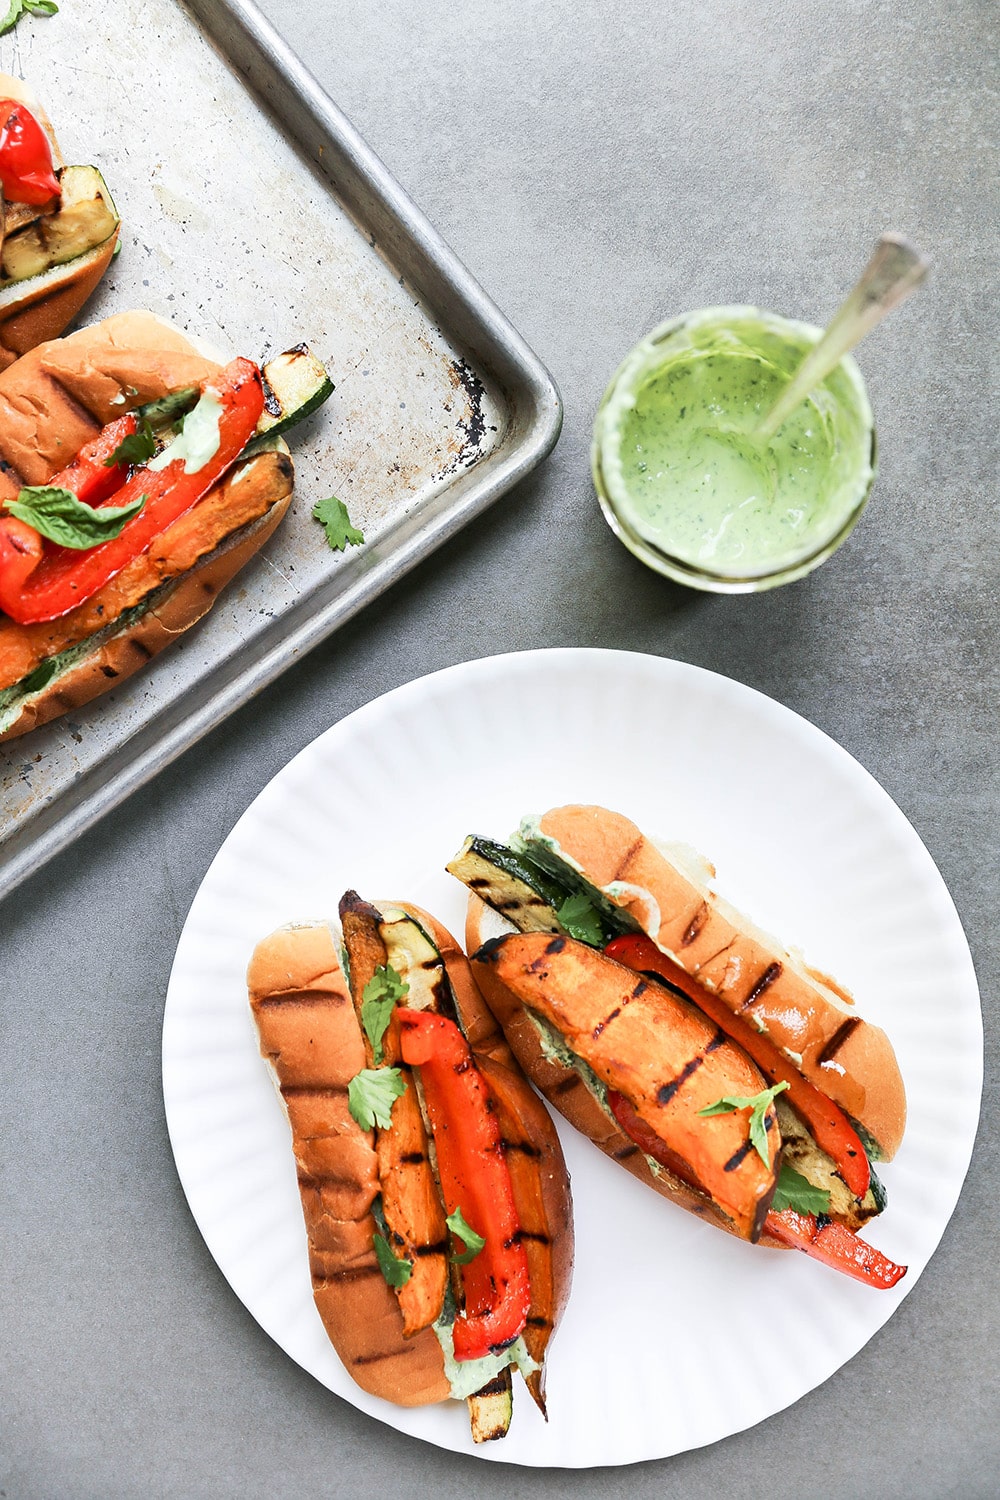 Grilled Sweet Potato and Vegetable Sandwiches